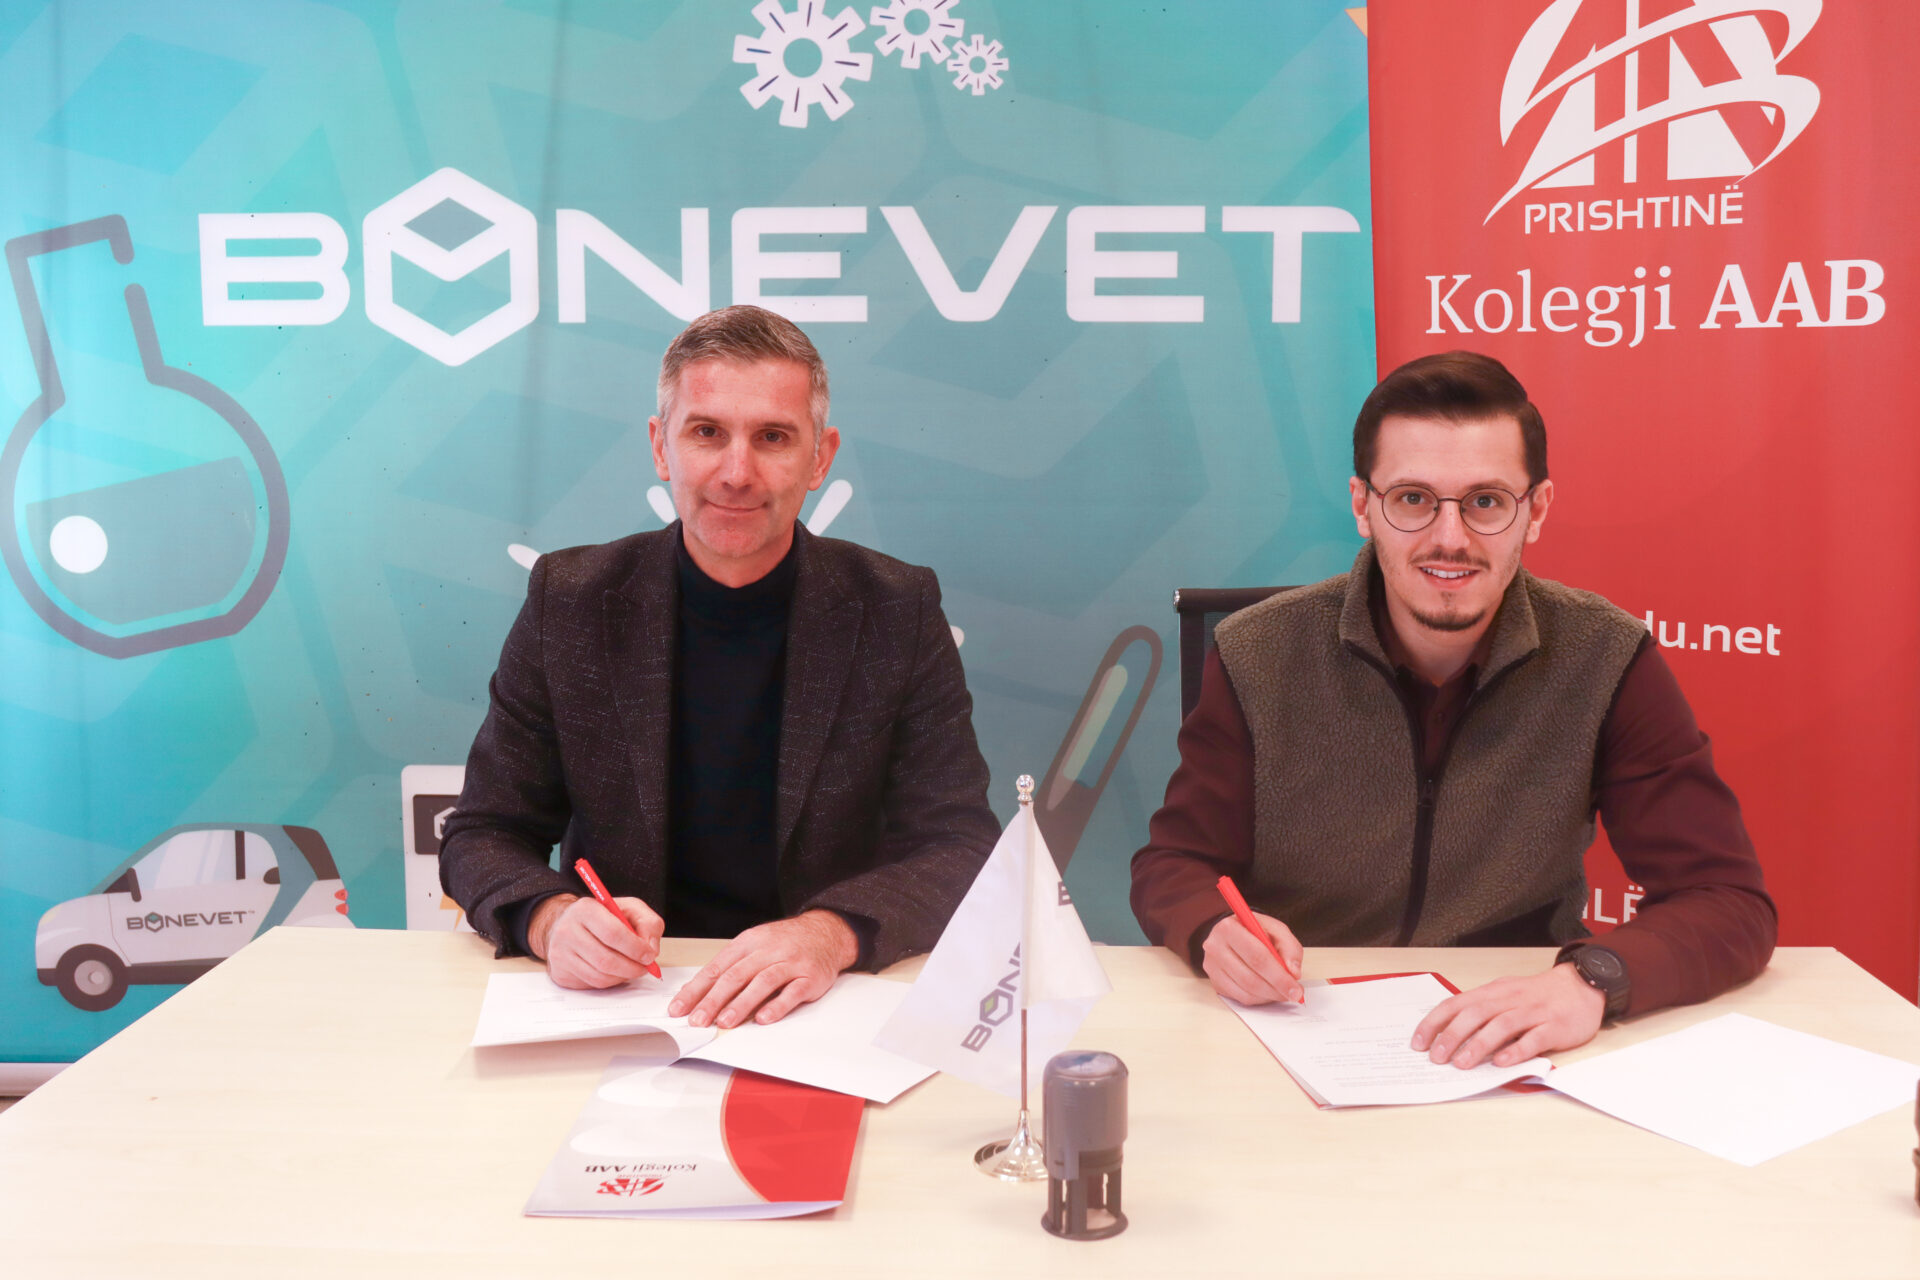 The campus of the AAB College in Gjakovë signed an agreement with the "BONEVET" foundation